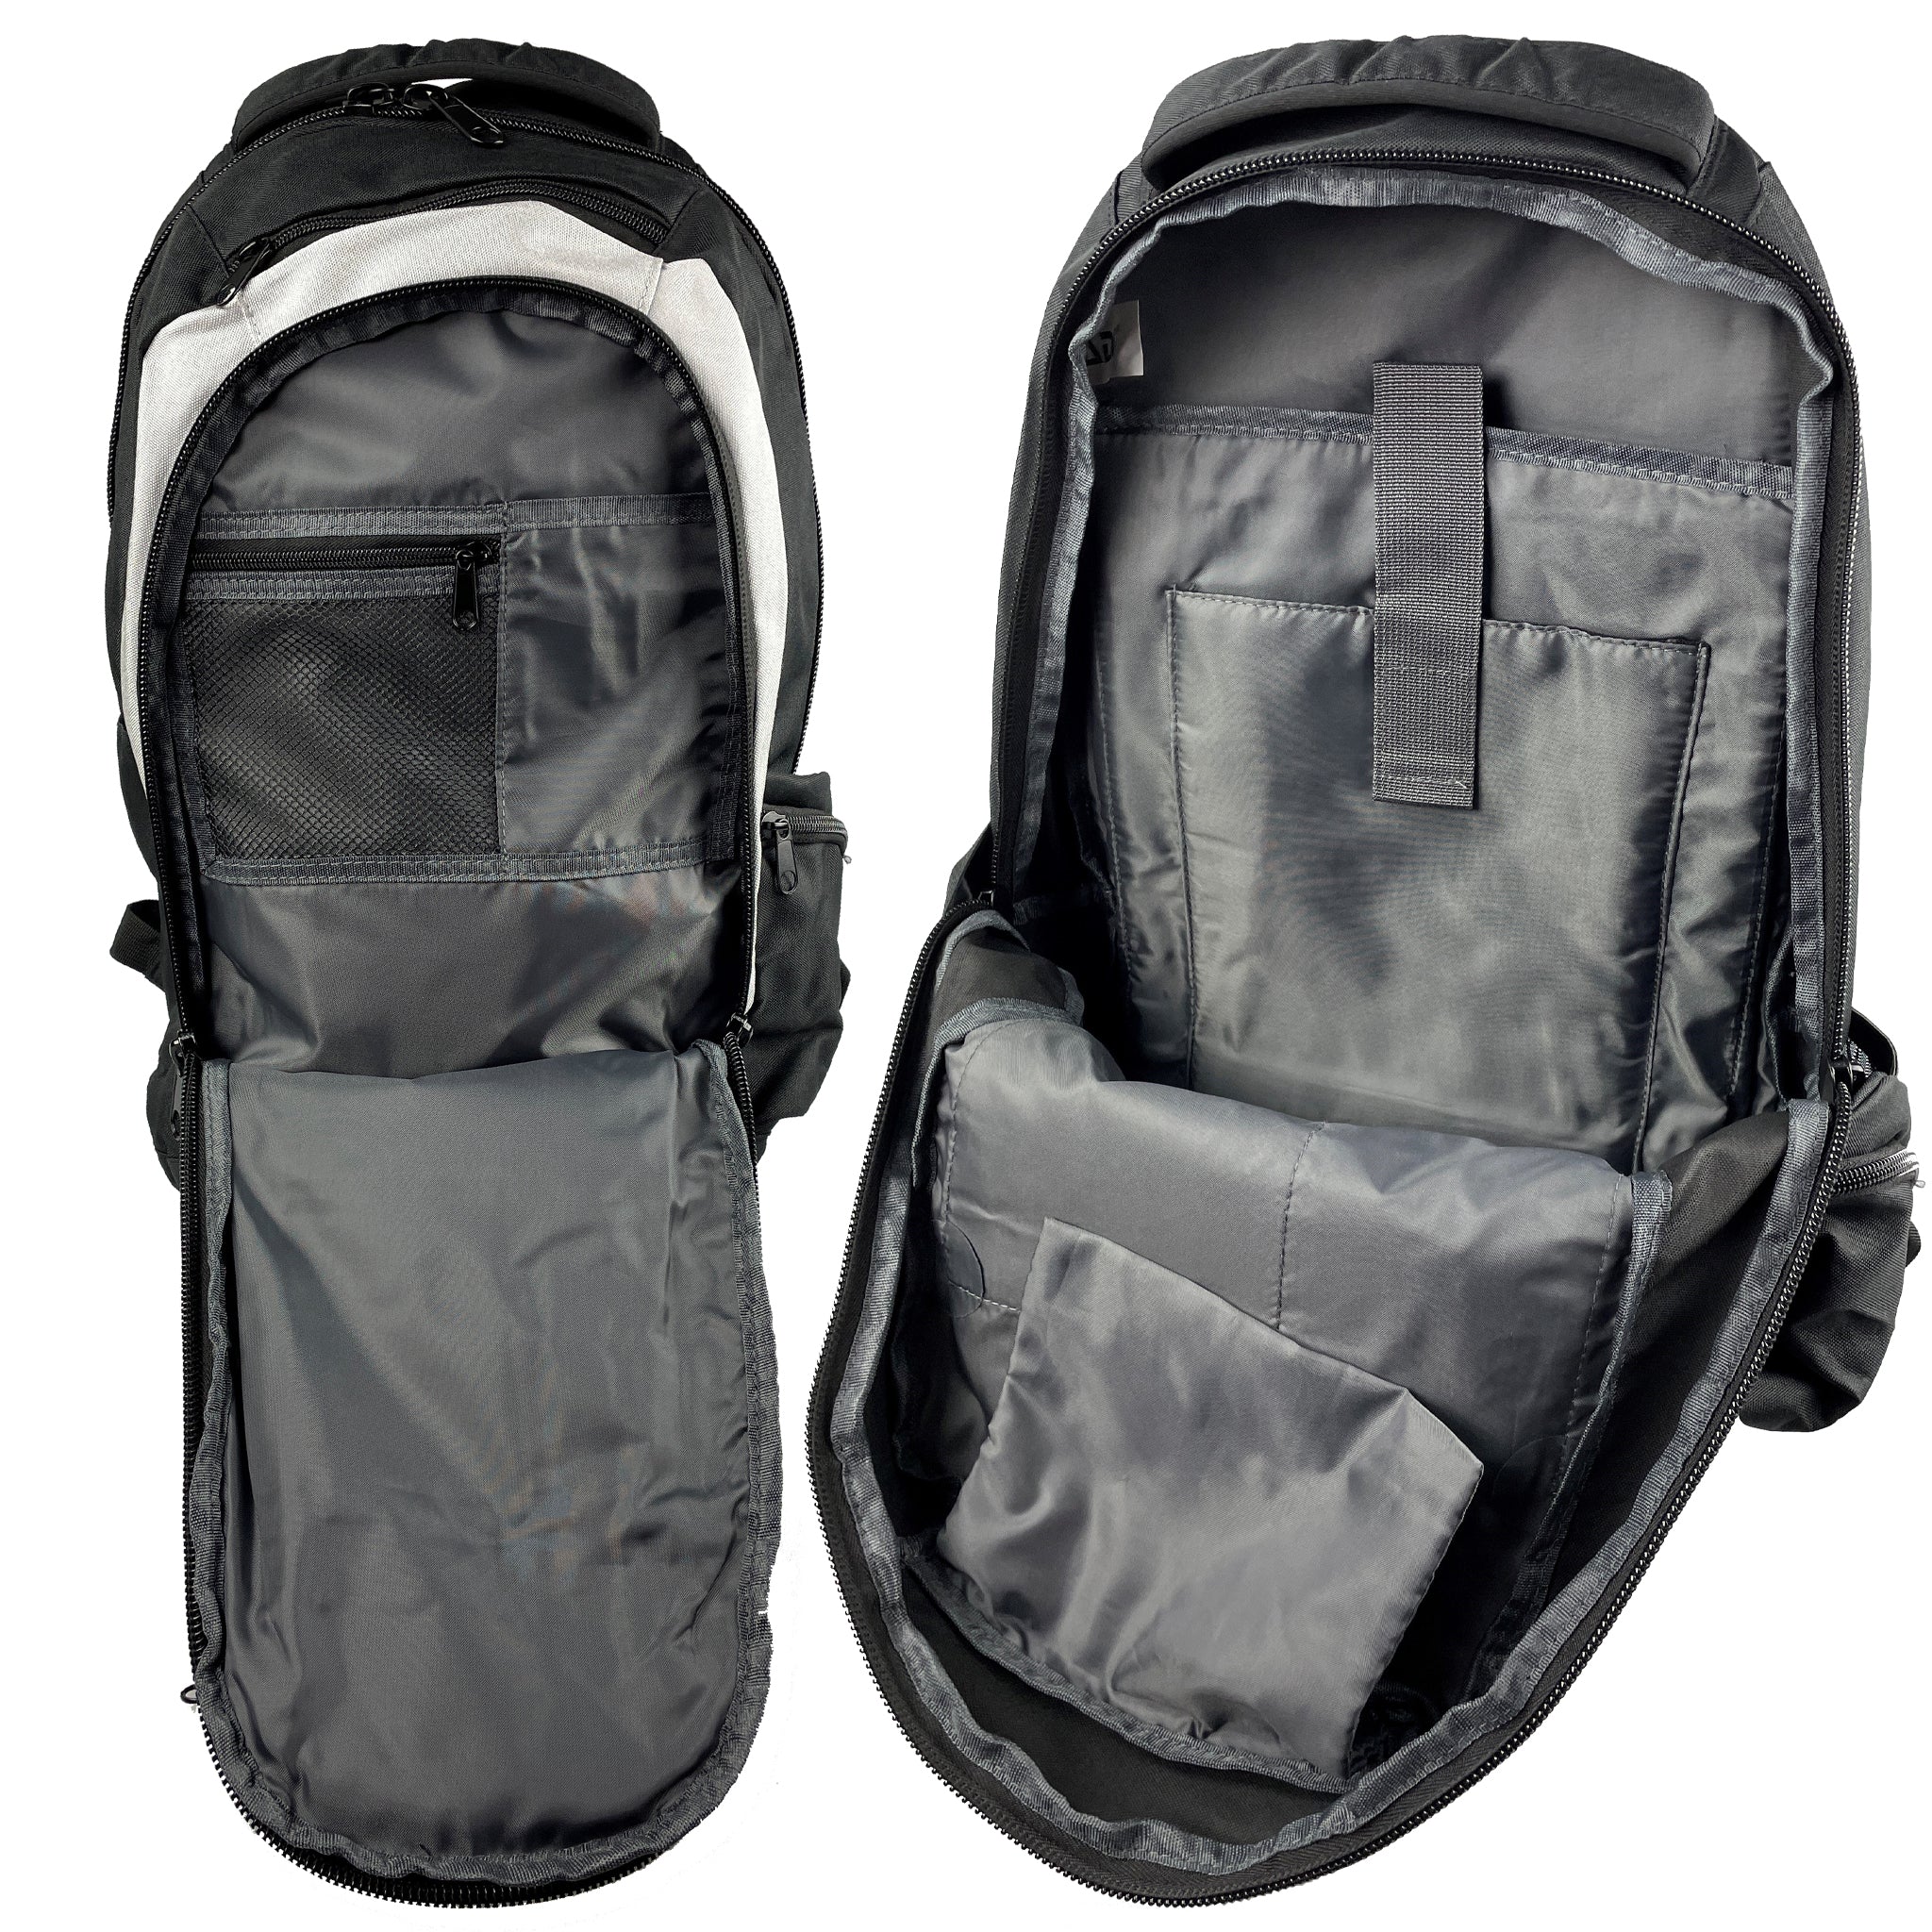 PADI Backpack | Zipped outer section and generous zipped main compartment with padded sections